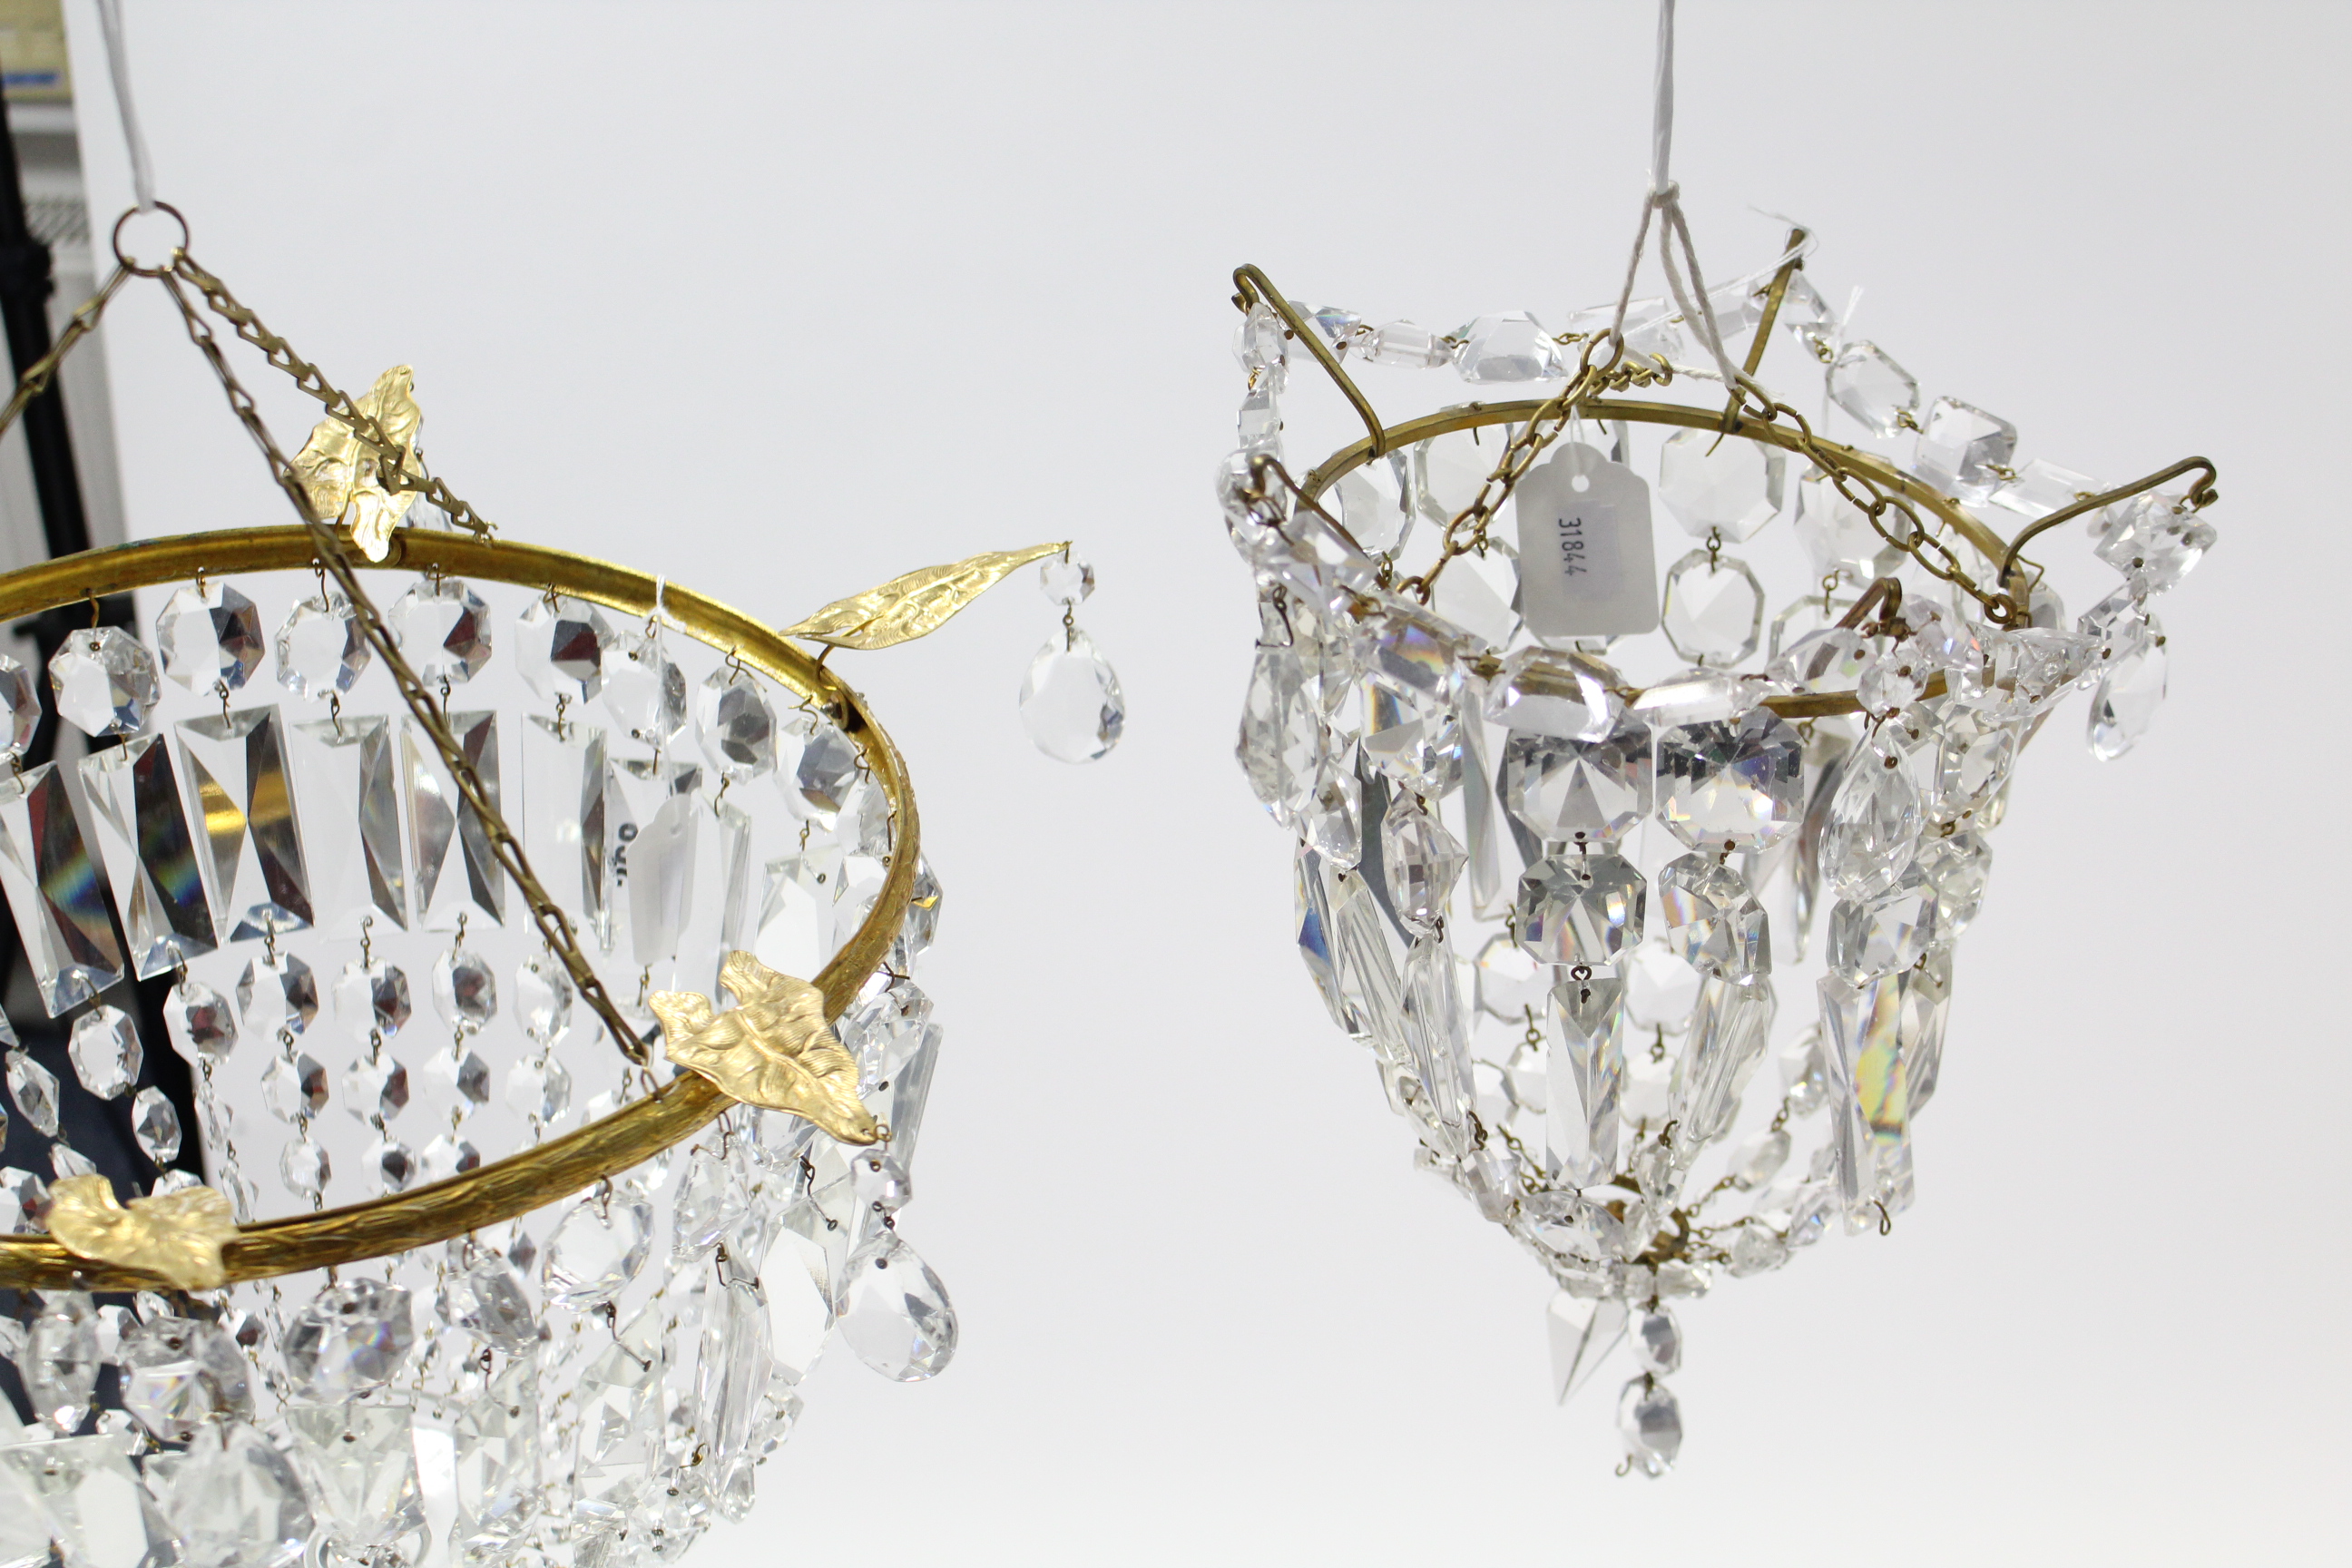 A gilt-metal frame basket-design ceiling light fitting hung with prism drops & strands-of-beads, 12” - Image 3 of 3